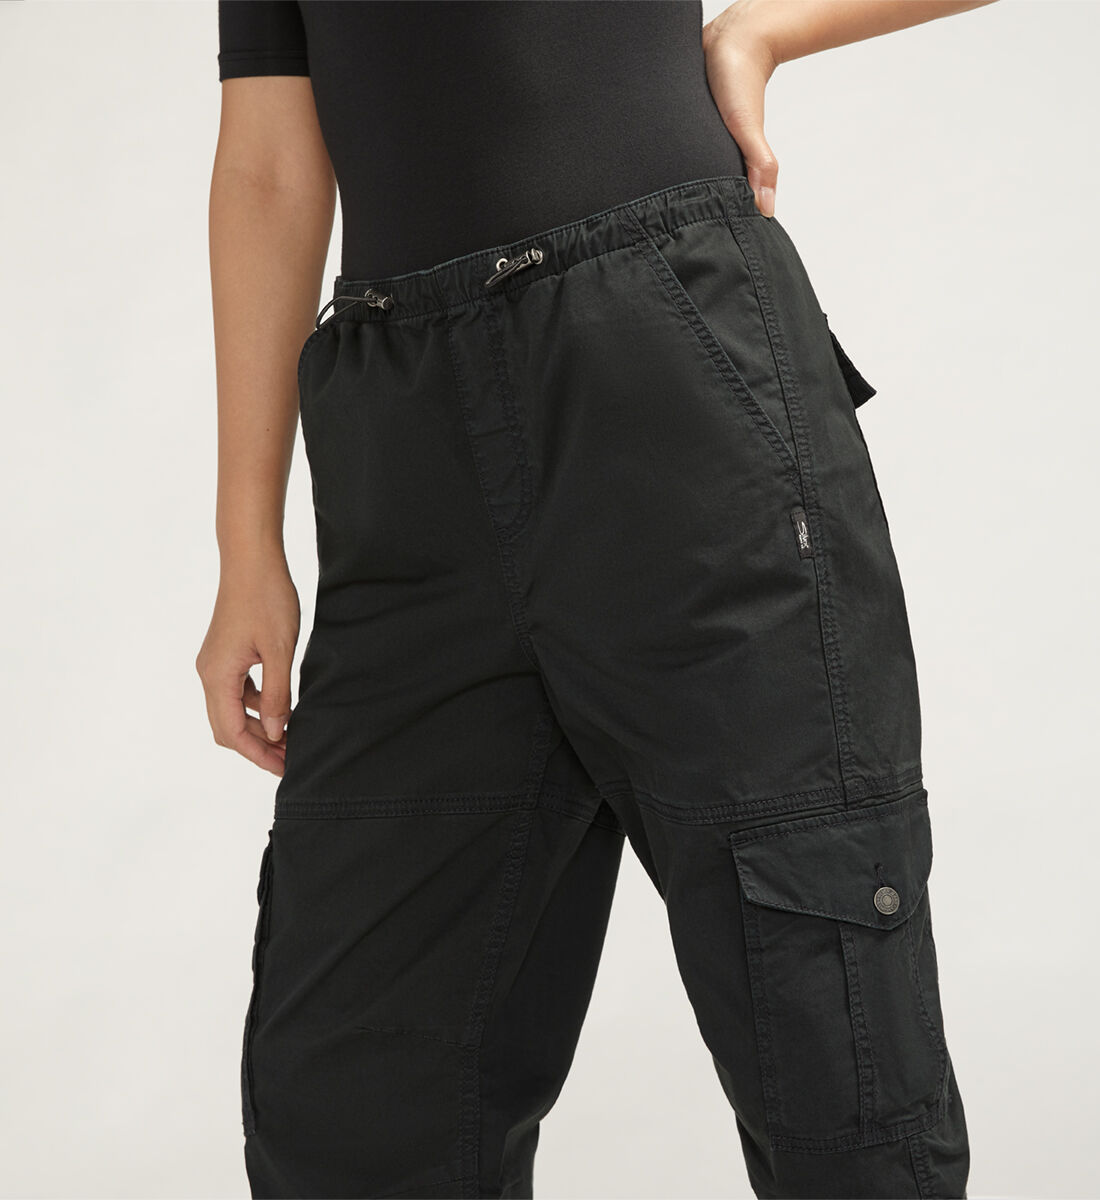 Buy Parachute Cargo Pant for USD 74.00 | Silver Jeans US New